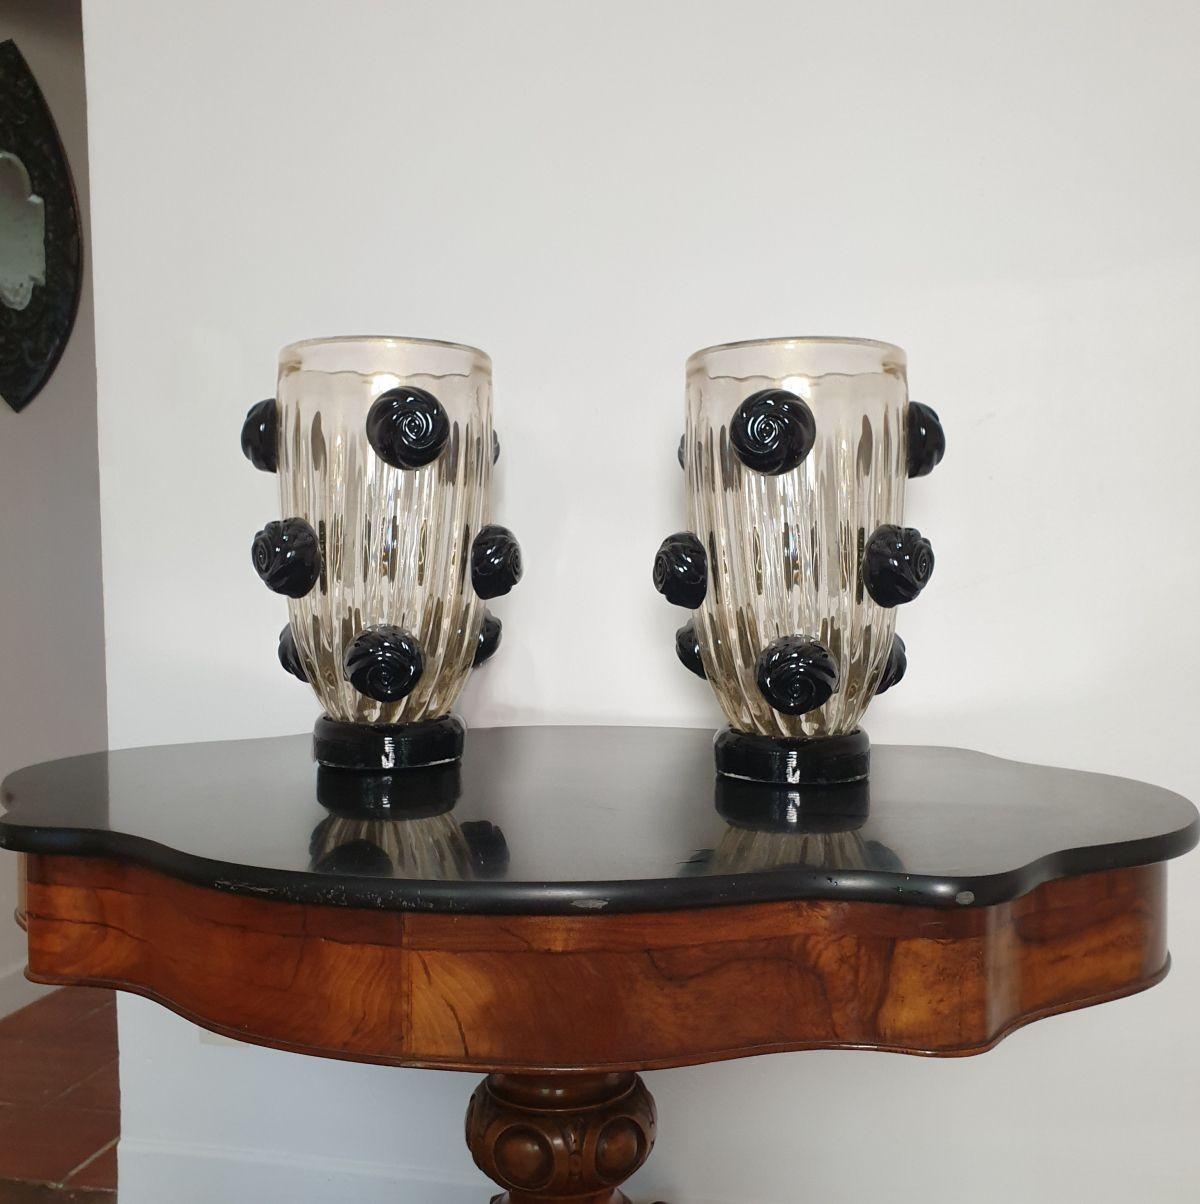 Pair of large Mid-Century Modern Murano glass vases, signed Costantini. Italy 1970s.
The vases are priced and sold by pair.
The large Italian vases are handmade and entirely in Murano glass.
The base is in black opaque Murano glass, and signed.
The